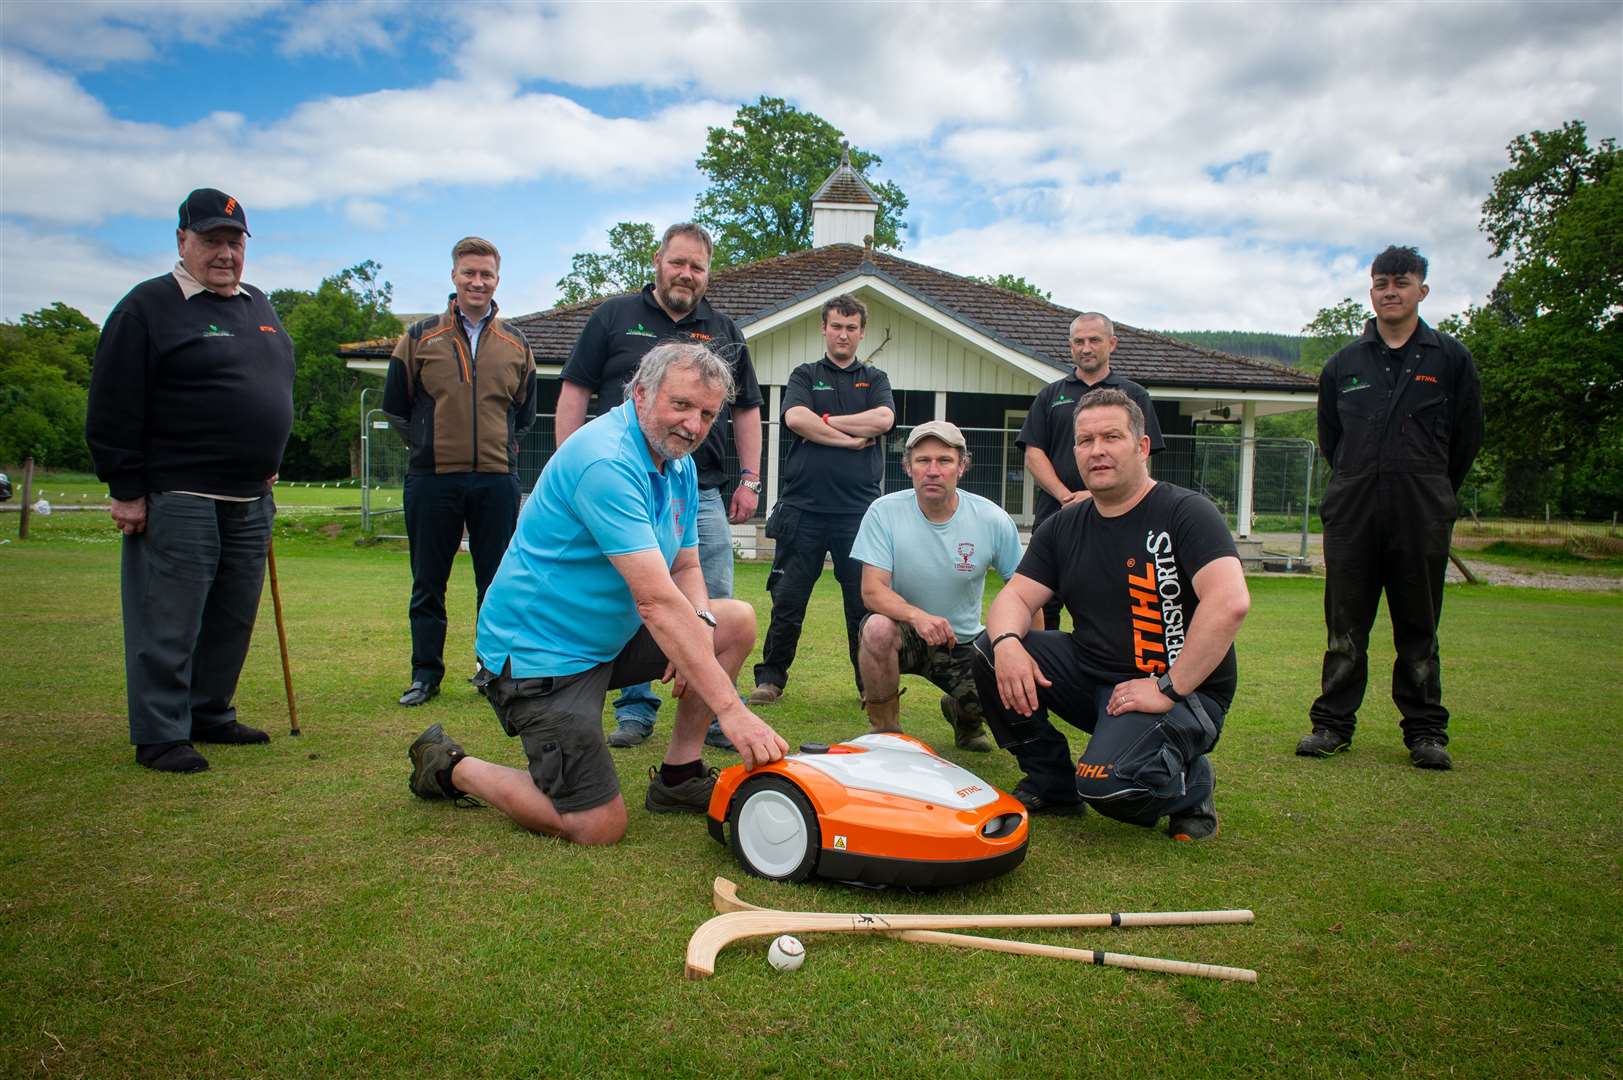 Caberfeidh Shinty Club gets a new robotic lawnmower. Pictured (front) Ian MacLean, club president, John Macpherson, committee member with Stuart Wharm from STIHL with the Frank Nicol team behind. Picture: Callum Mackay